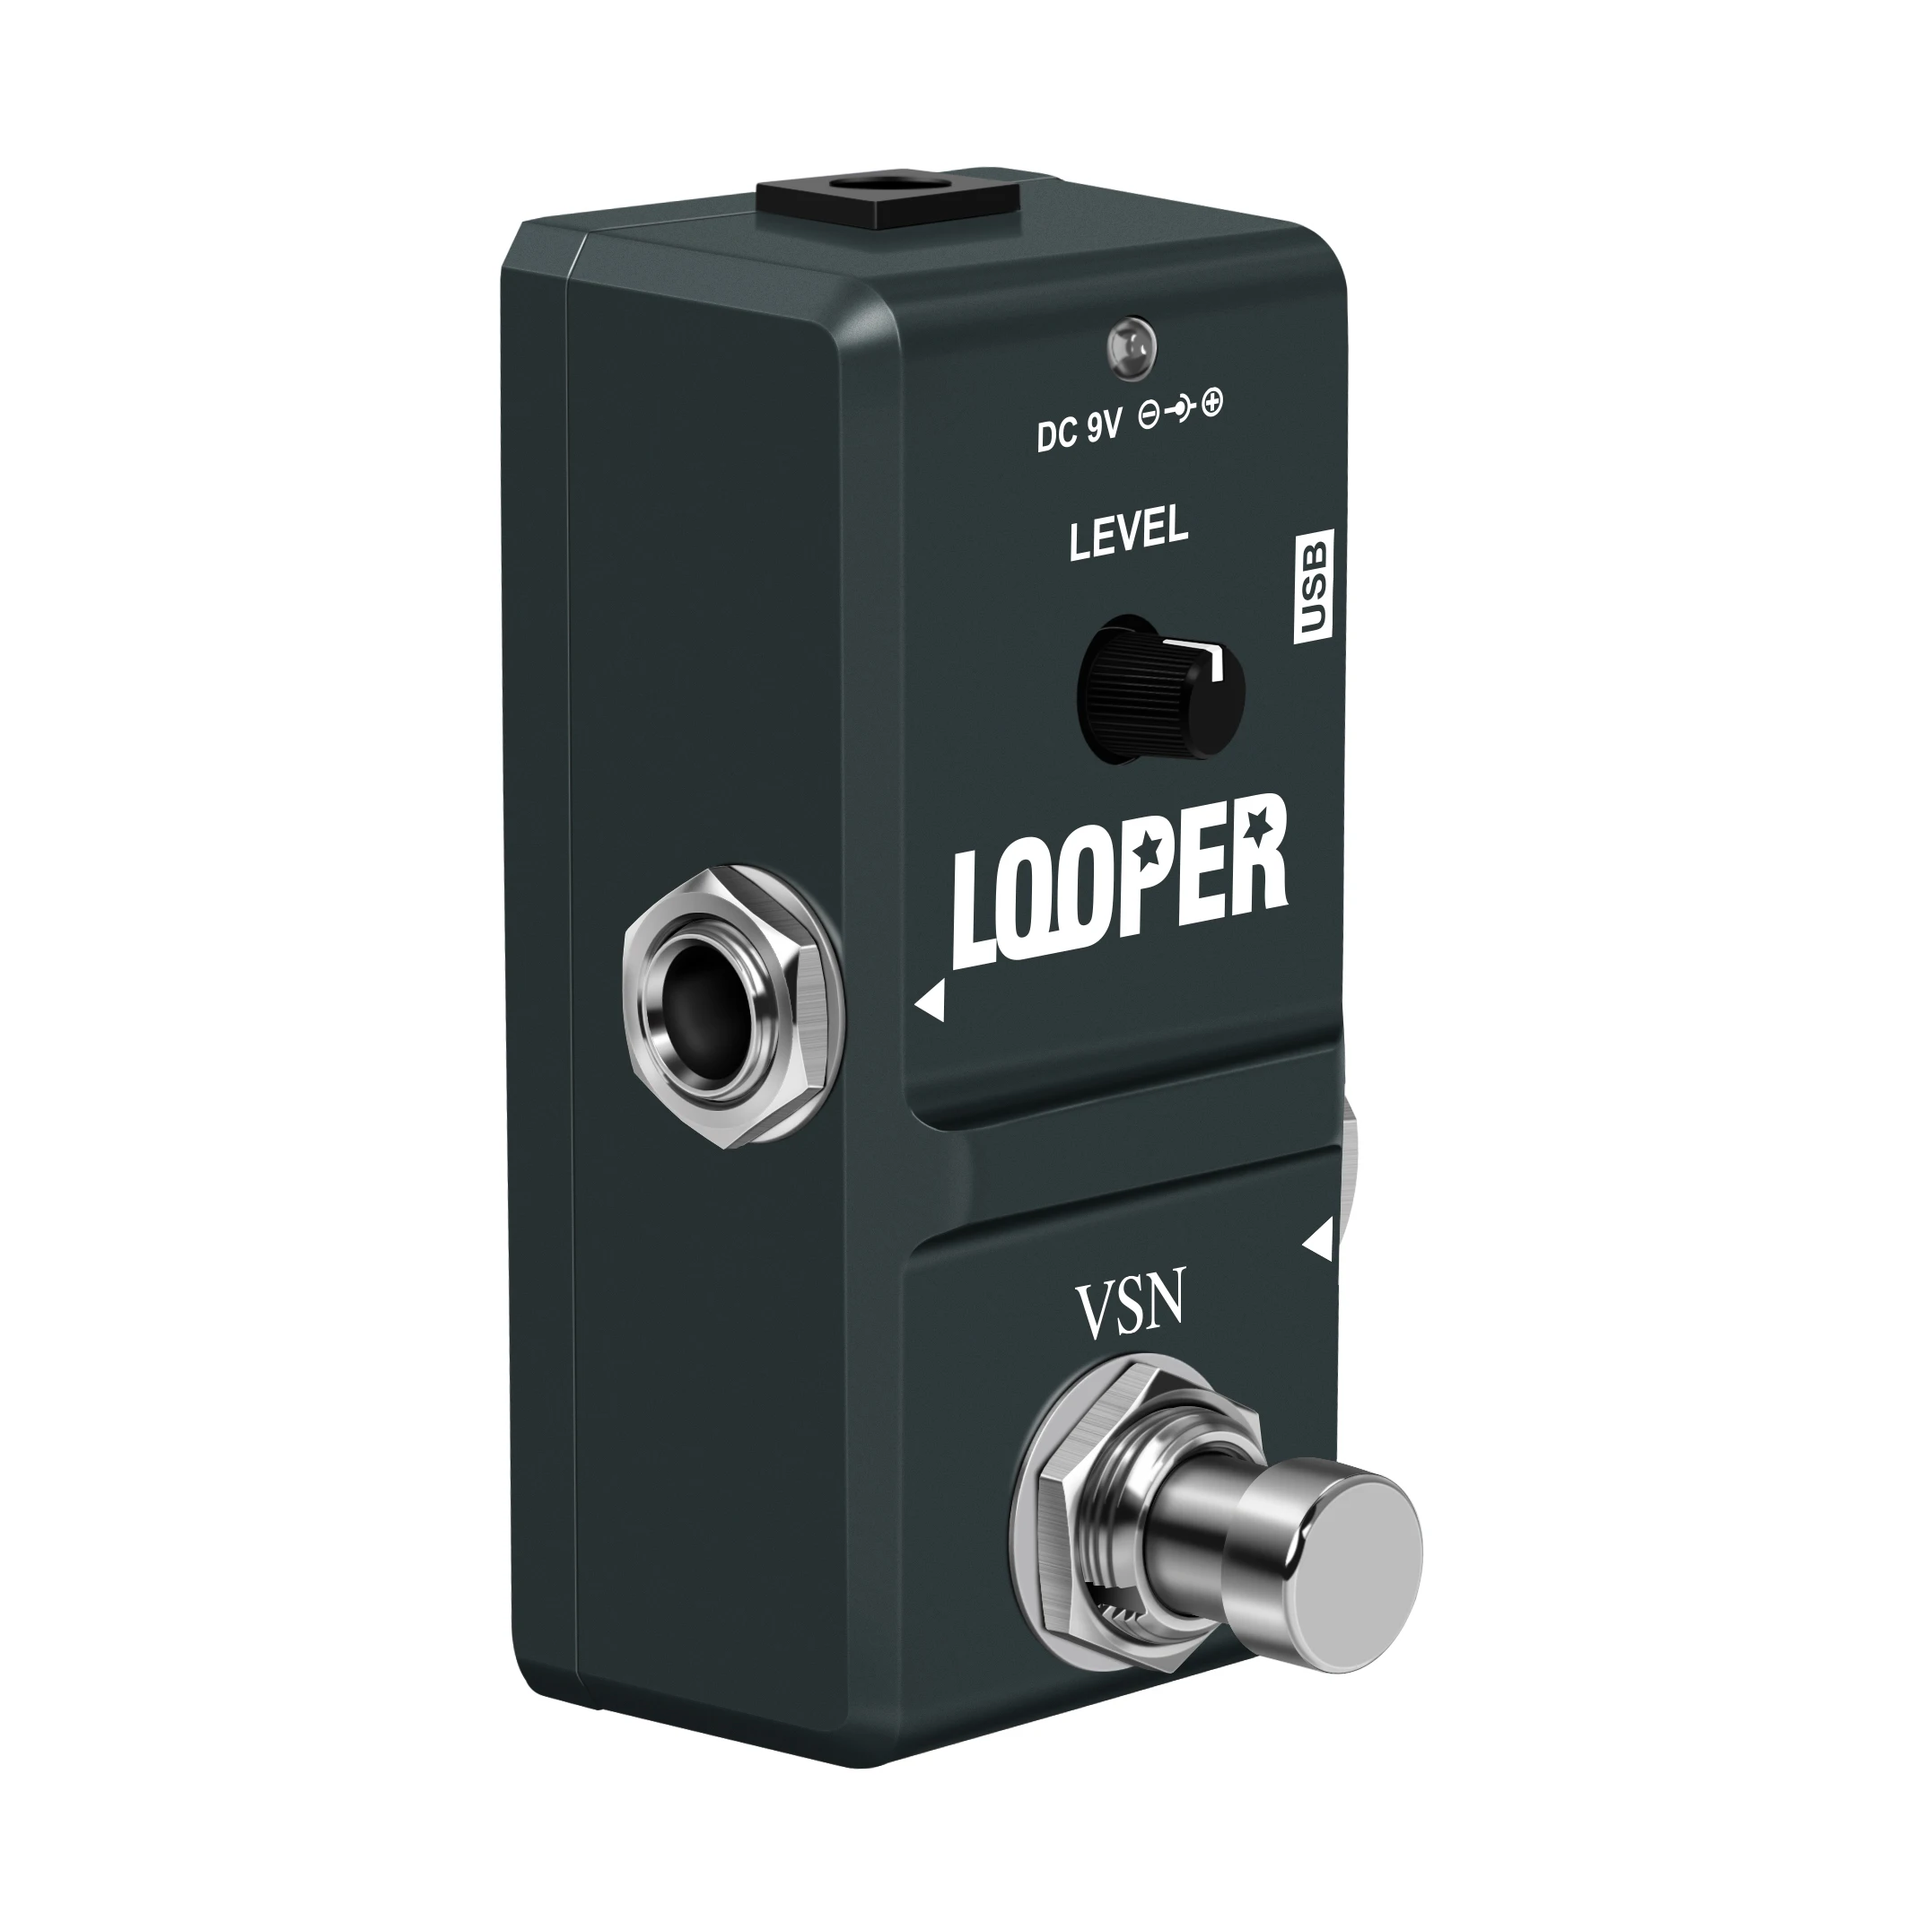 VSN LN-332 48K Looper Electric Guitar Effect Loop Pedal 10 Minutes of Looping Unlimited Overdubs USB Port True Bypass enlarge